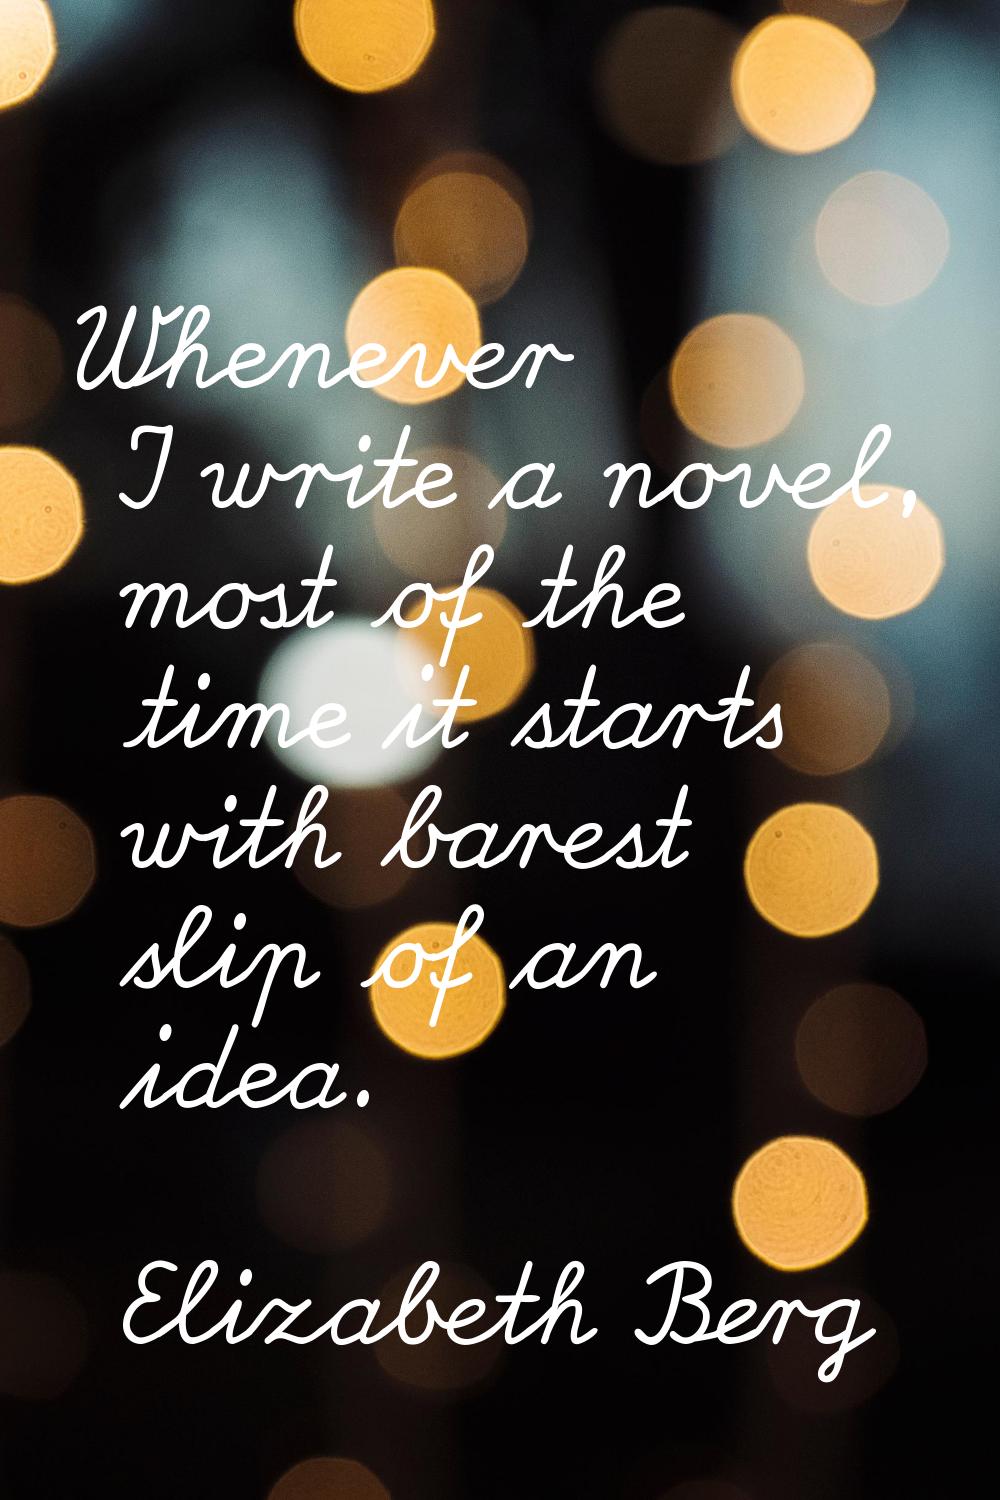 Whenever I write a novel, most of the time it starts with barest slip of an idea.